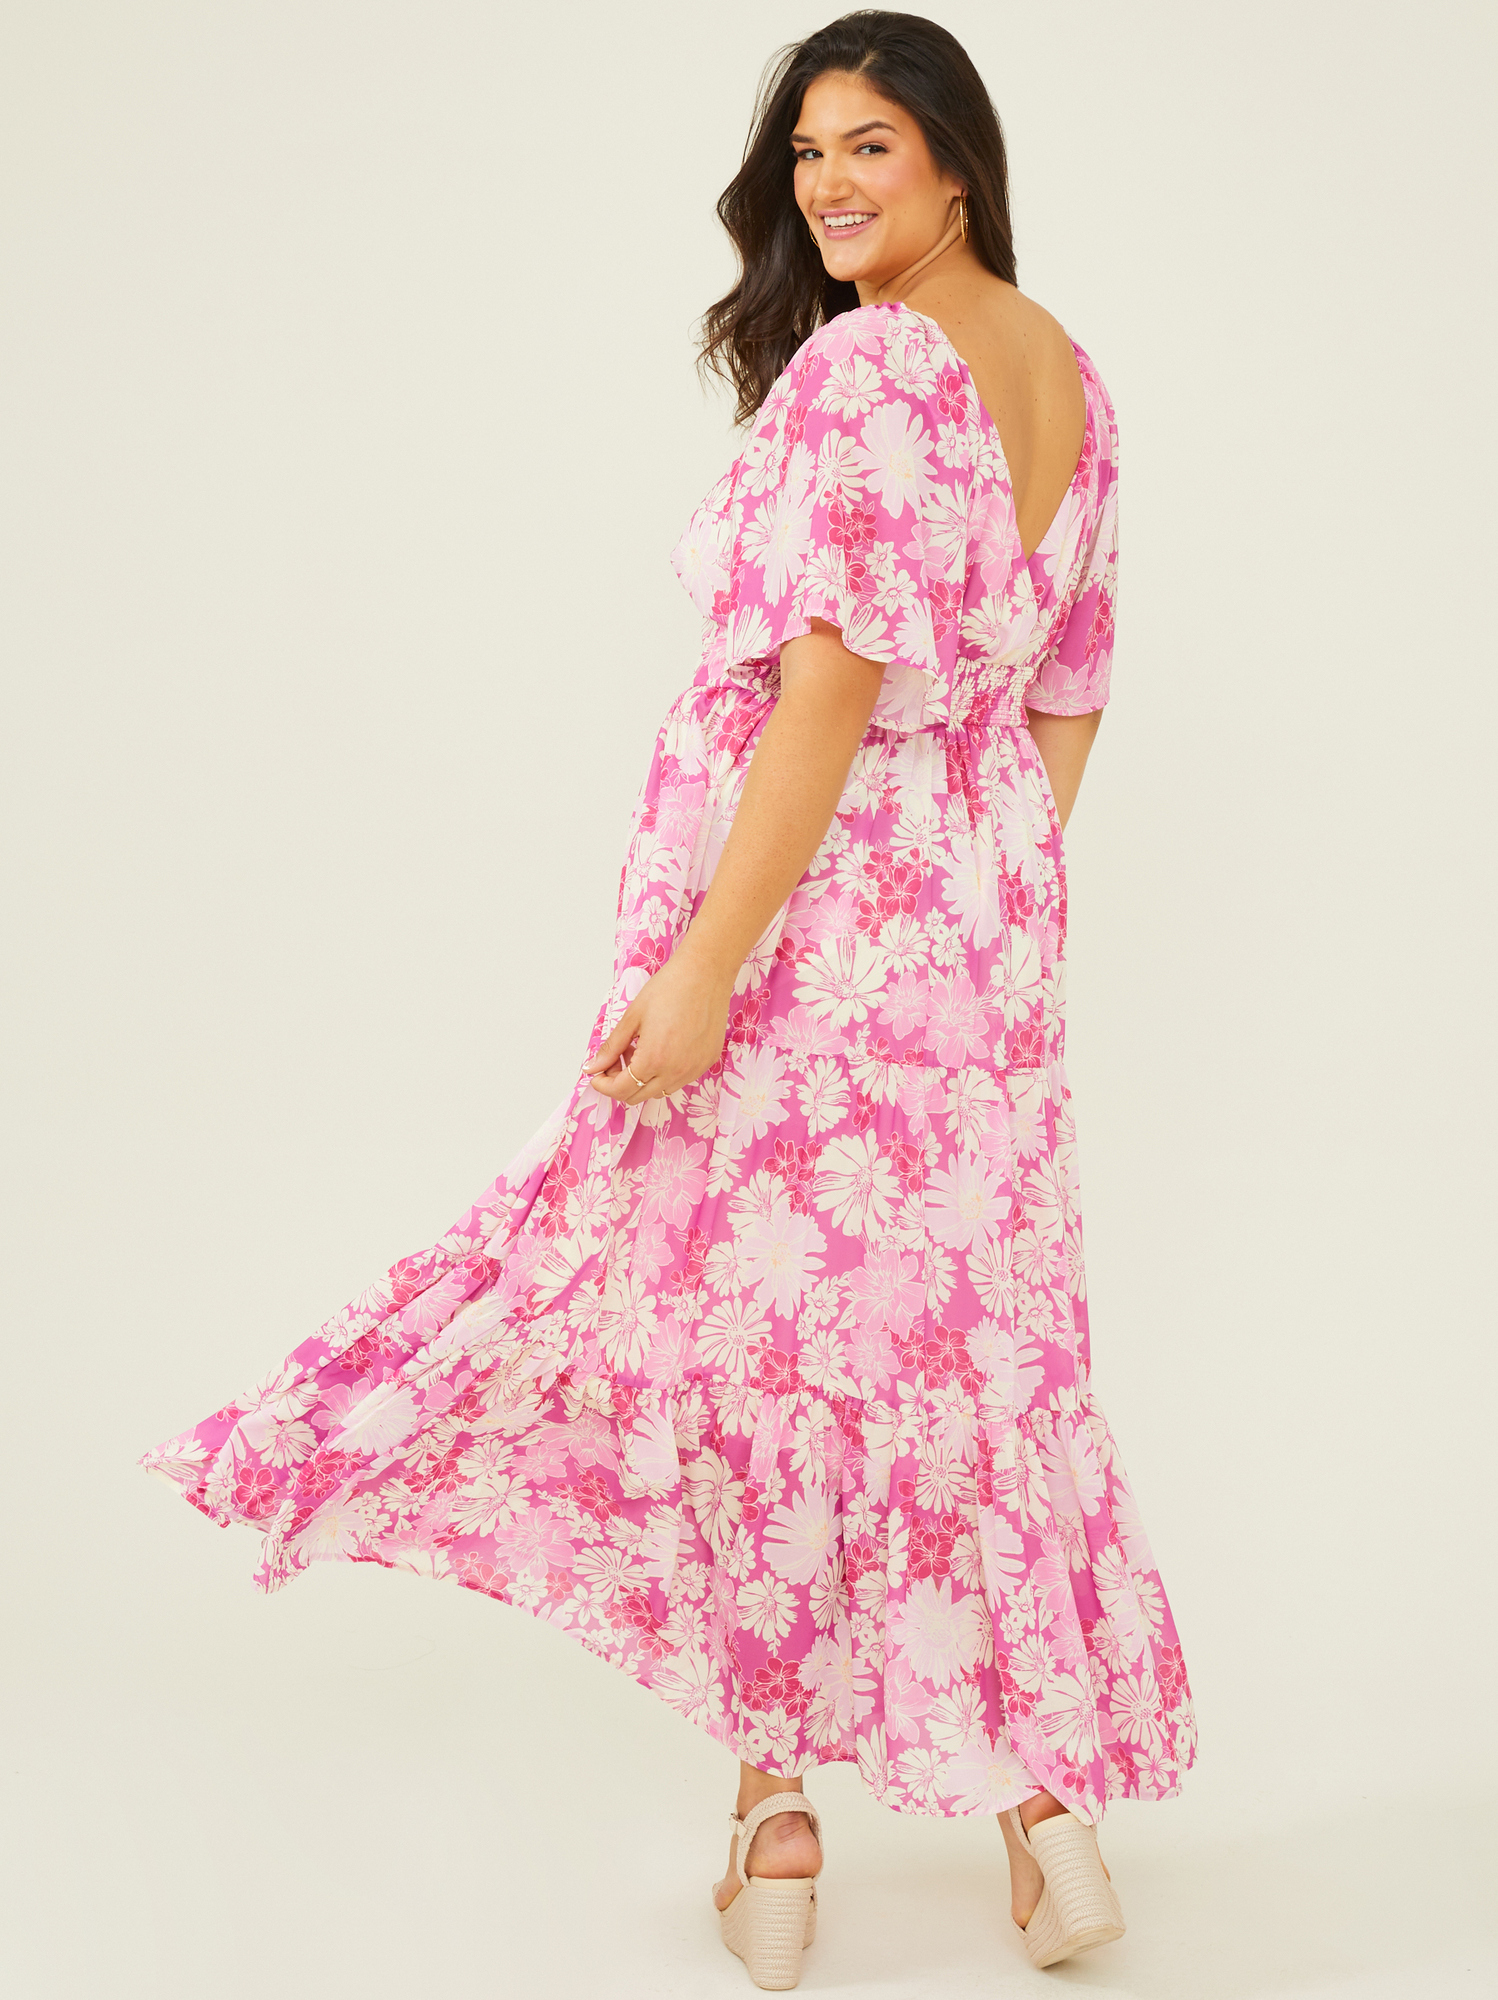 Serenity Floral Tiered Maxi Dress in Pink | Arula